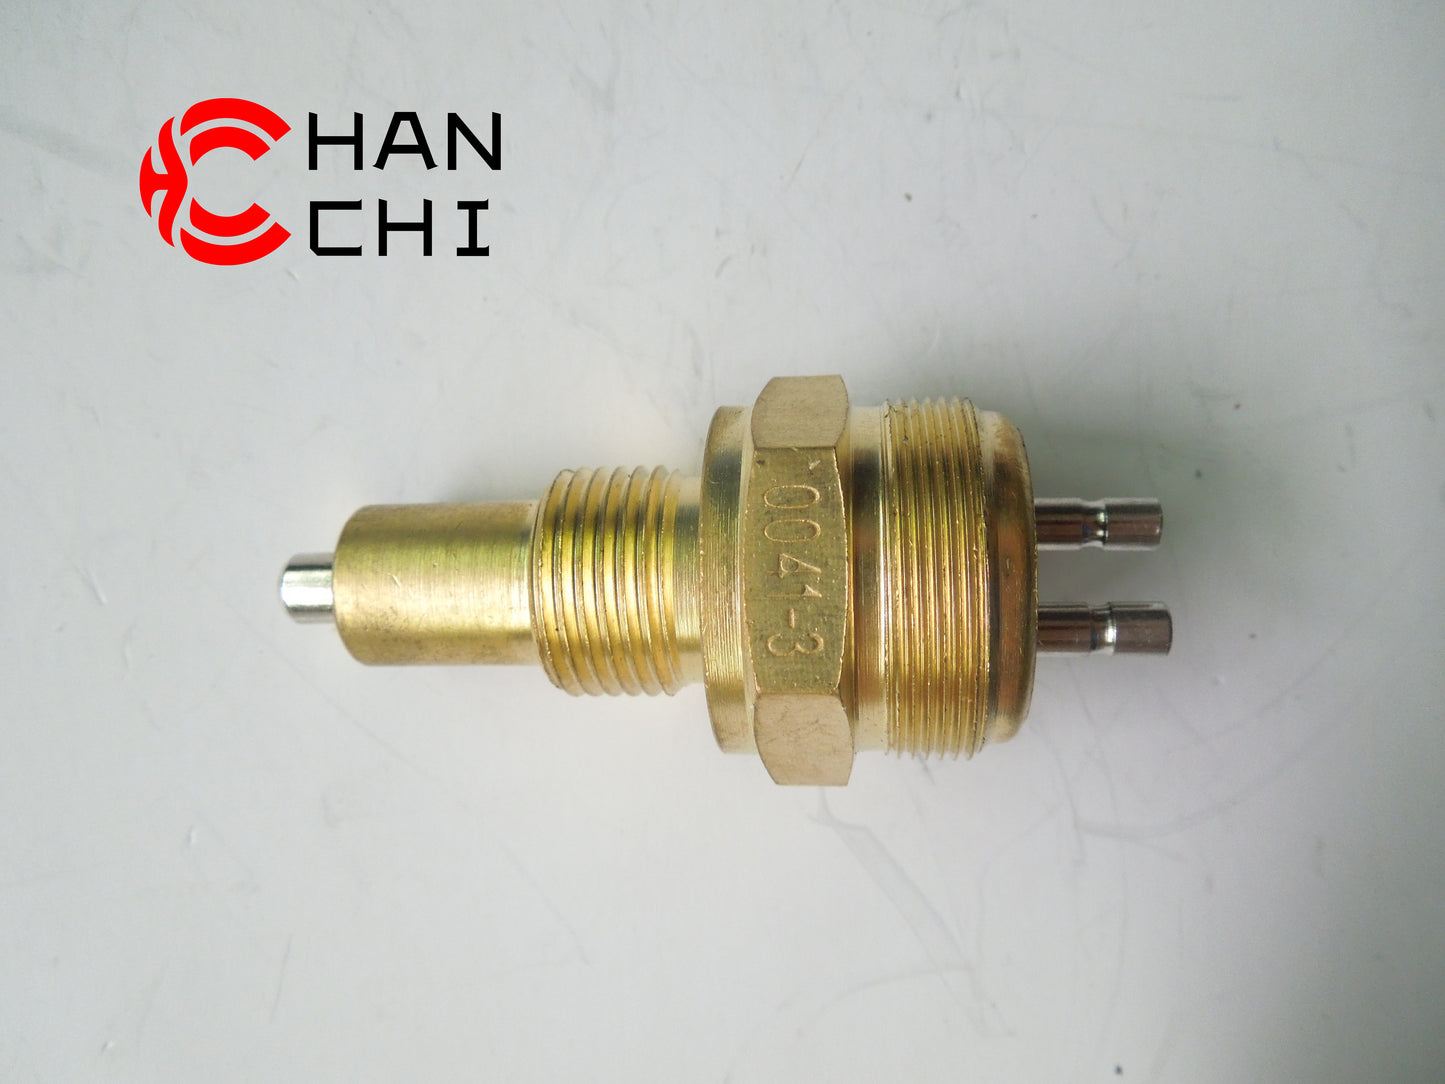 OEM: 0041-3 3781-00031 FASTMaterial: metalColor: black goldenOrigin: Made in ChinaWeight: 50gPacking List: 1* Neutral Switch More Service We can provide OEM Manufacturing service We can Be your one-step solution for Auto Parts We can provide technical scheme for you Feel Free to Contact Us, We will get back to you as soon as possible.